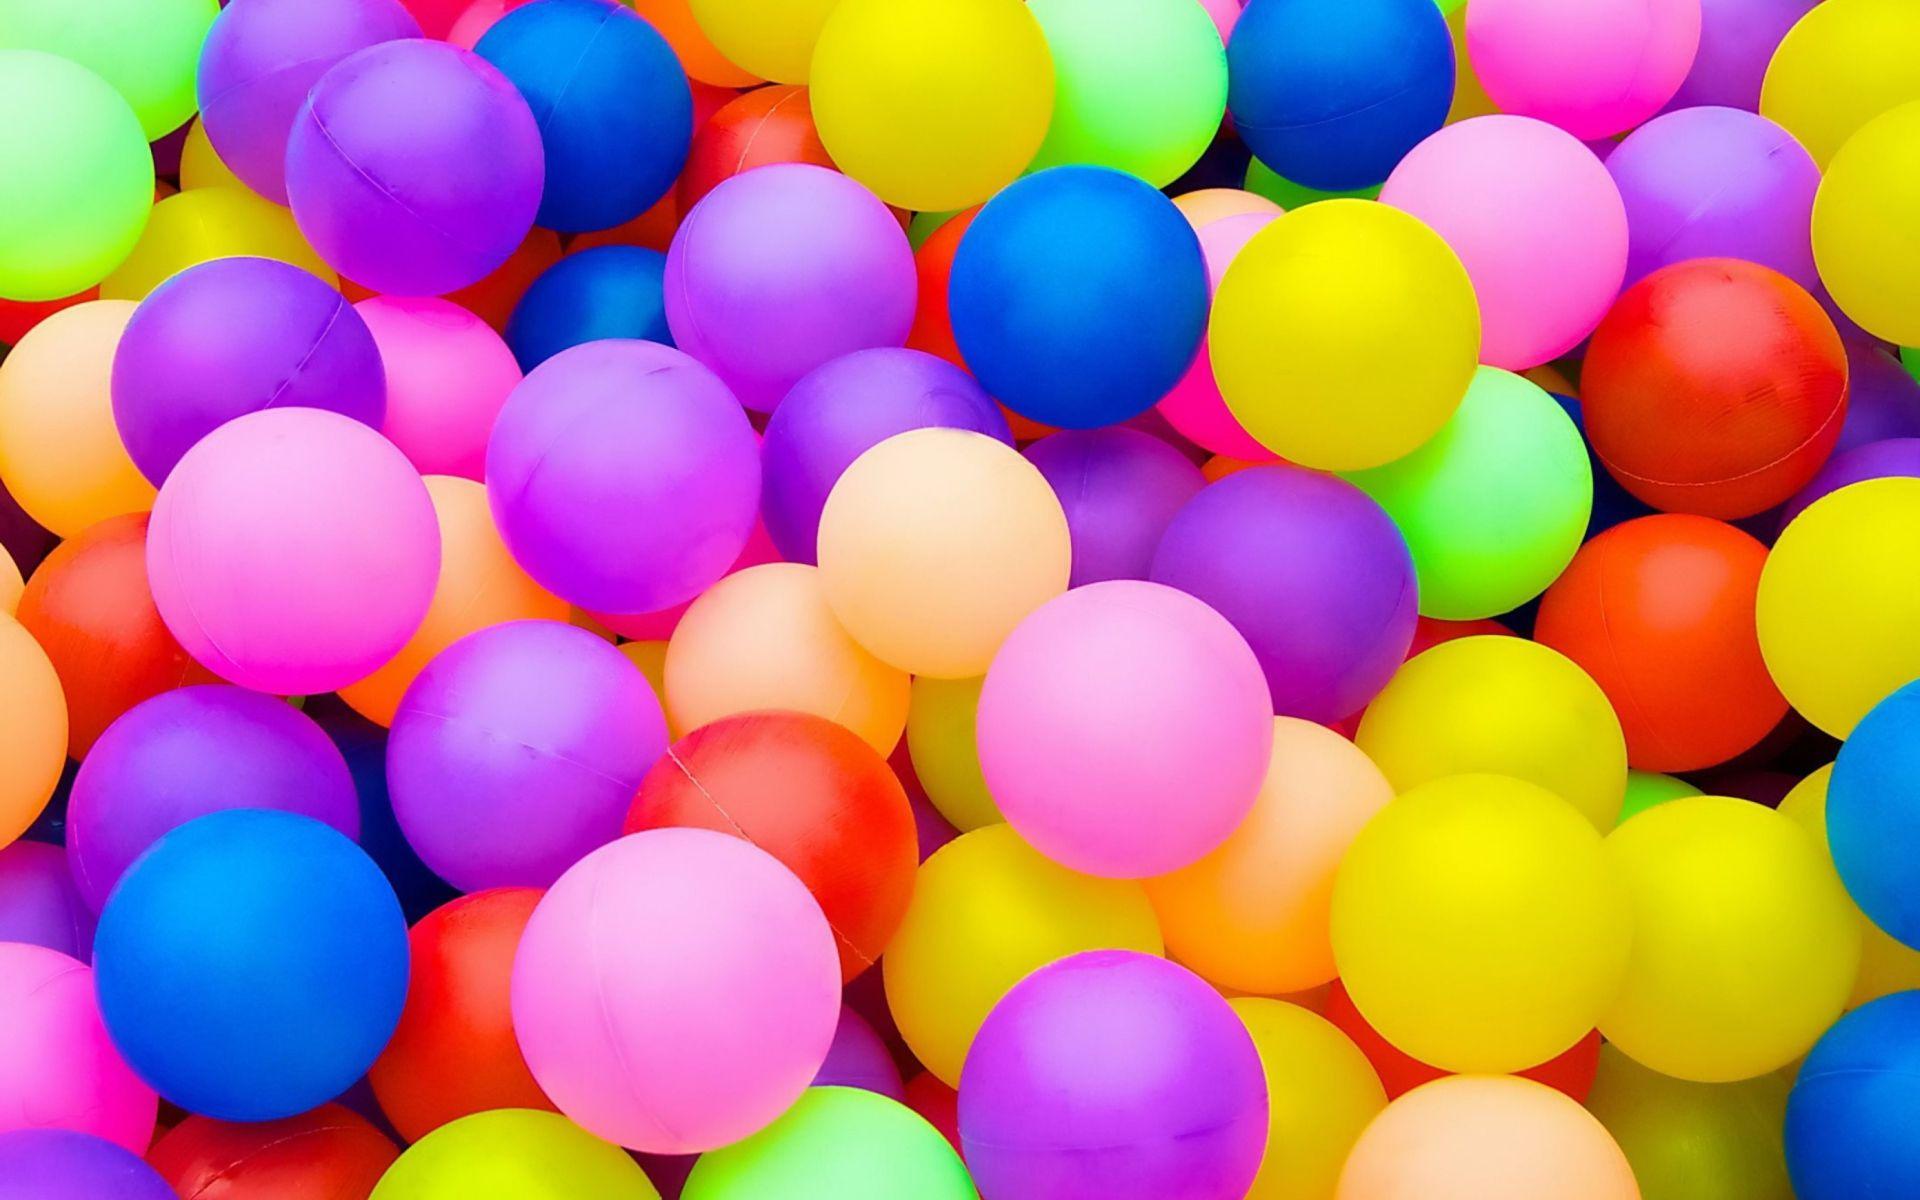 Beautiful Balloons Wallpaper HD for Your Desktop. New Year Time